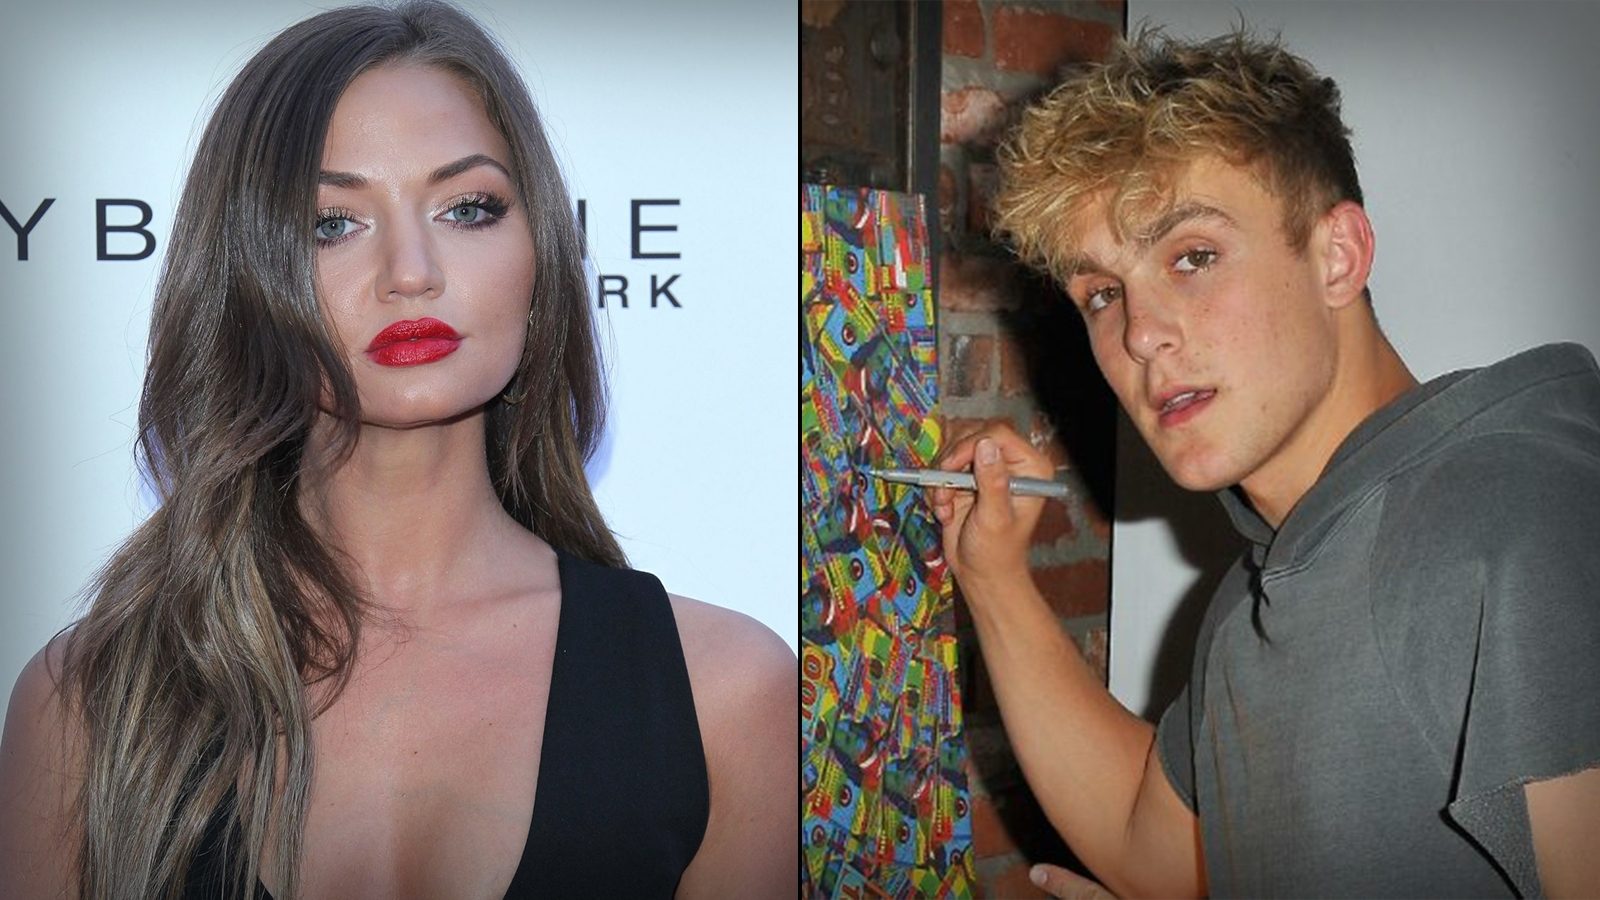 Erika Costell opens up about dating after breakup with Jake Paul - Dexerto.